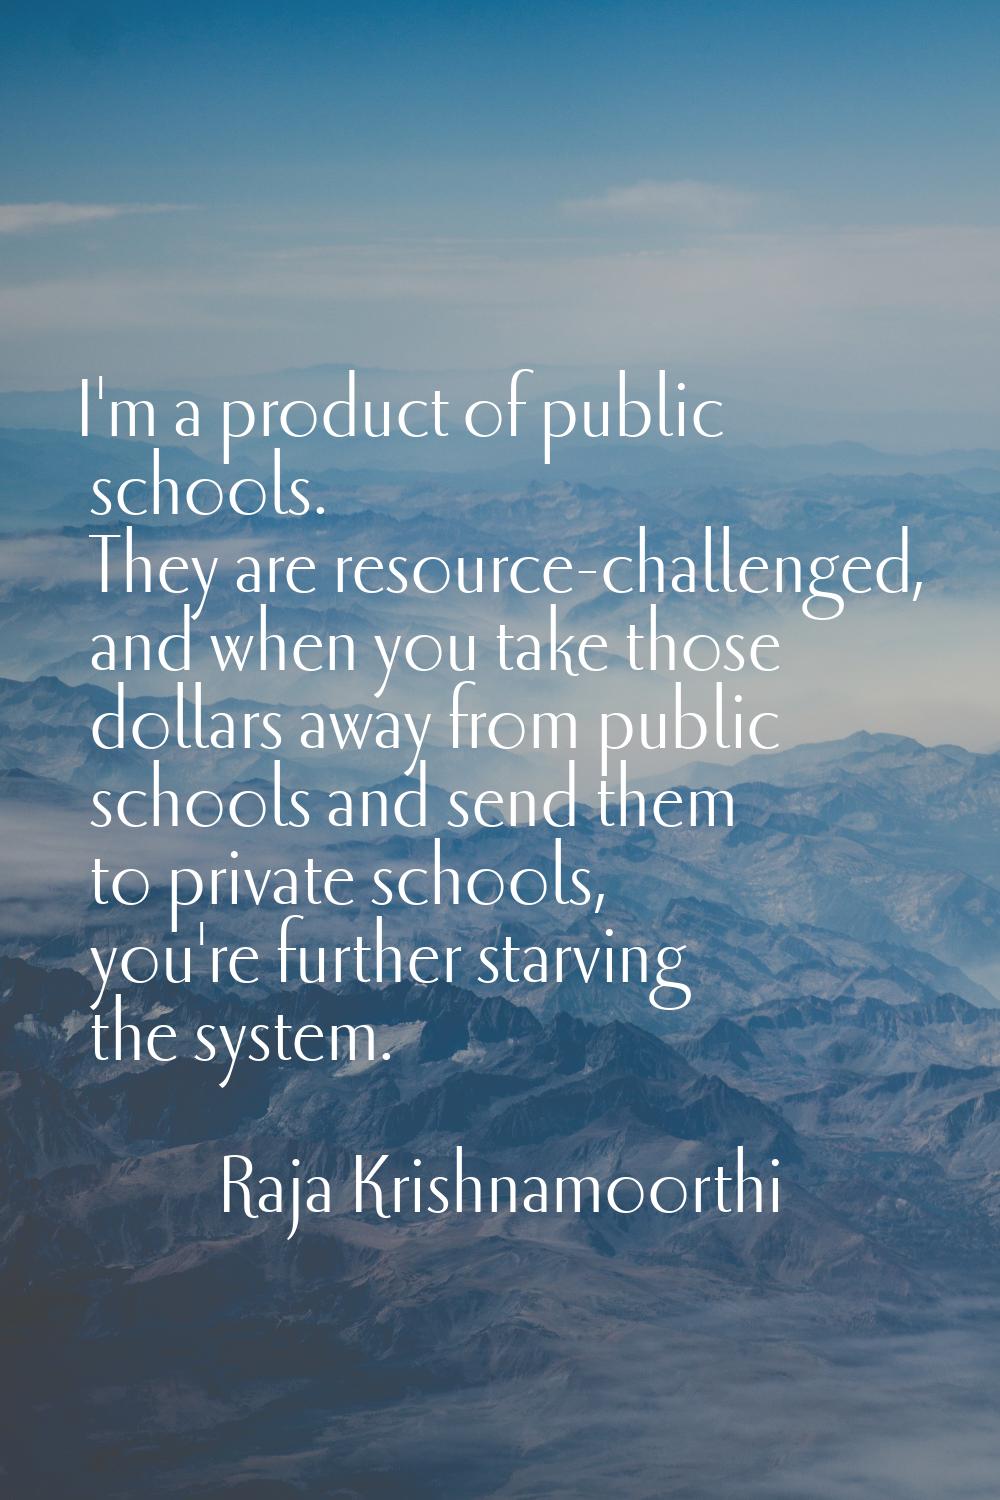 I'm a product of public schools. They are resource-challenged, and when you take those dollars away